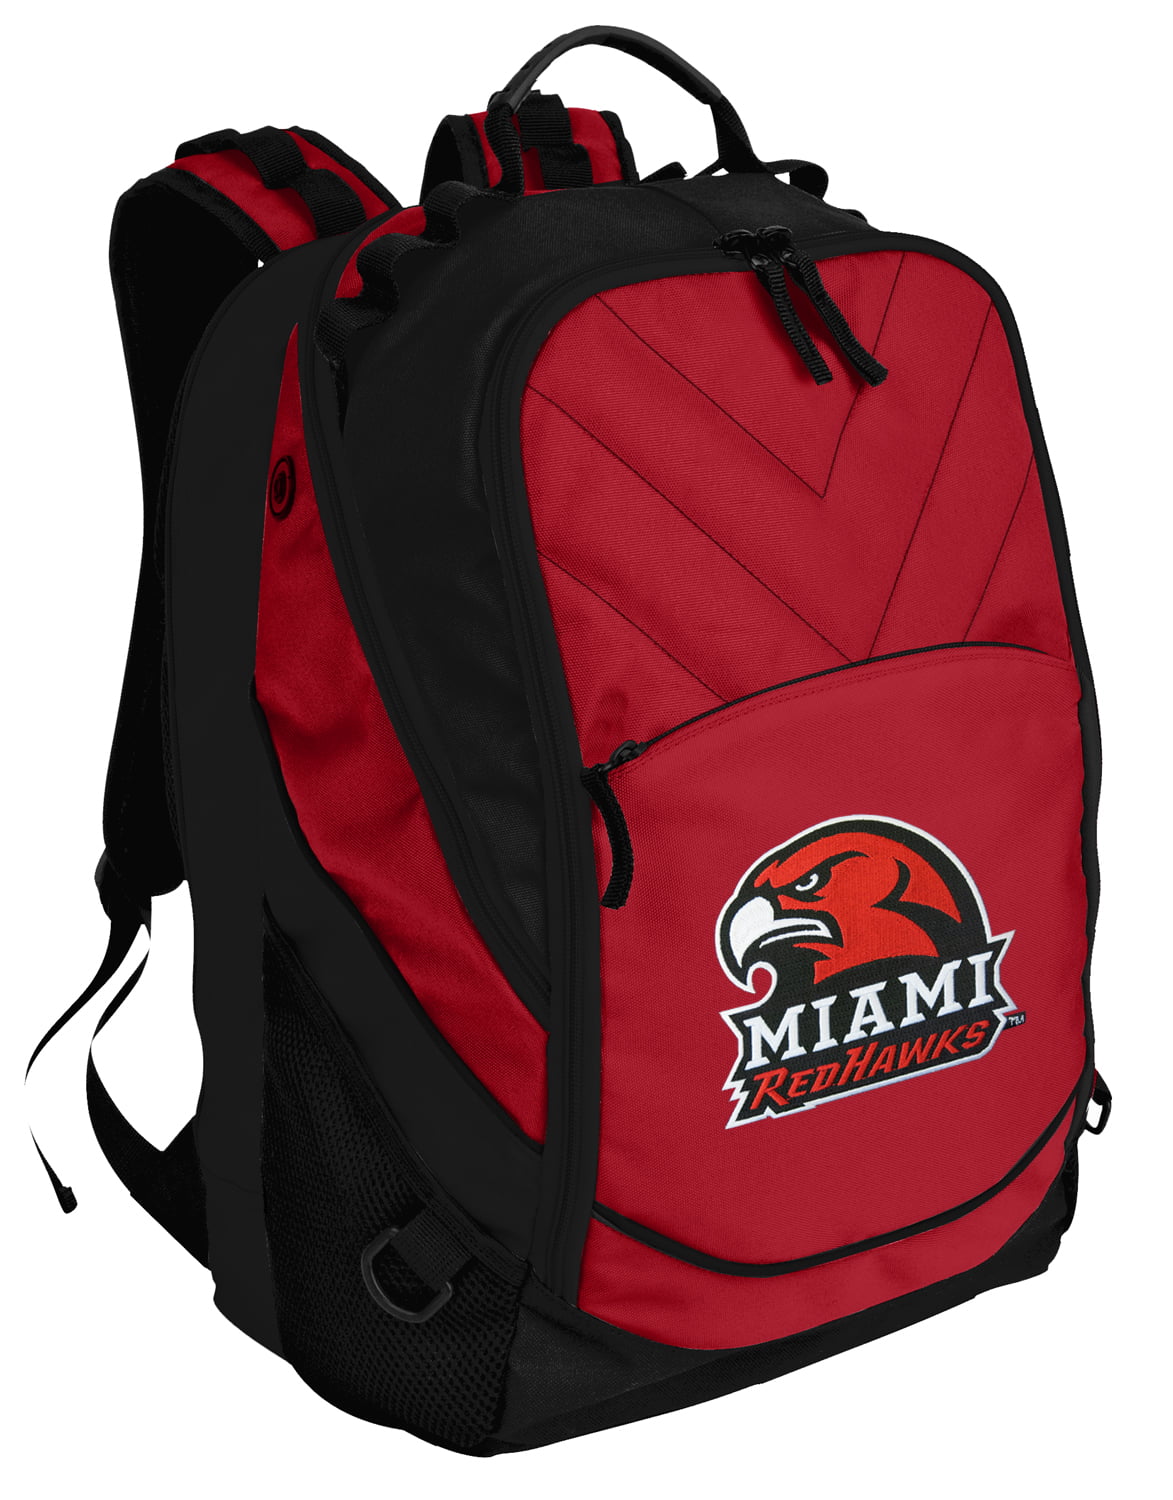 Large Miami Redhawks Duffel Bag Miami University Suitcase or Gym Bag for Men Or Her 